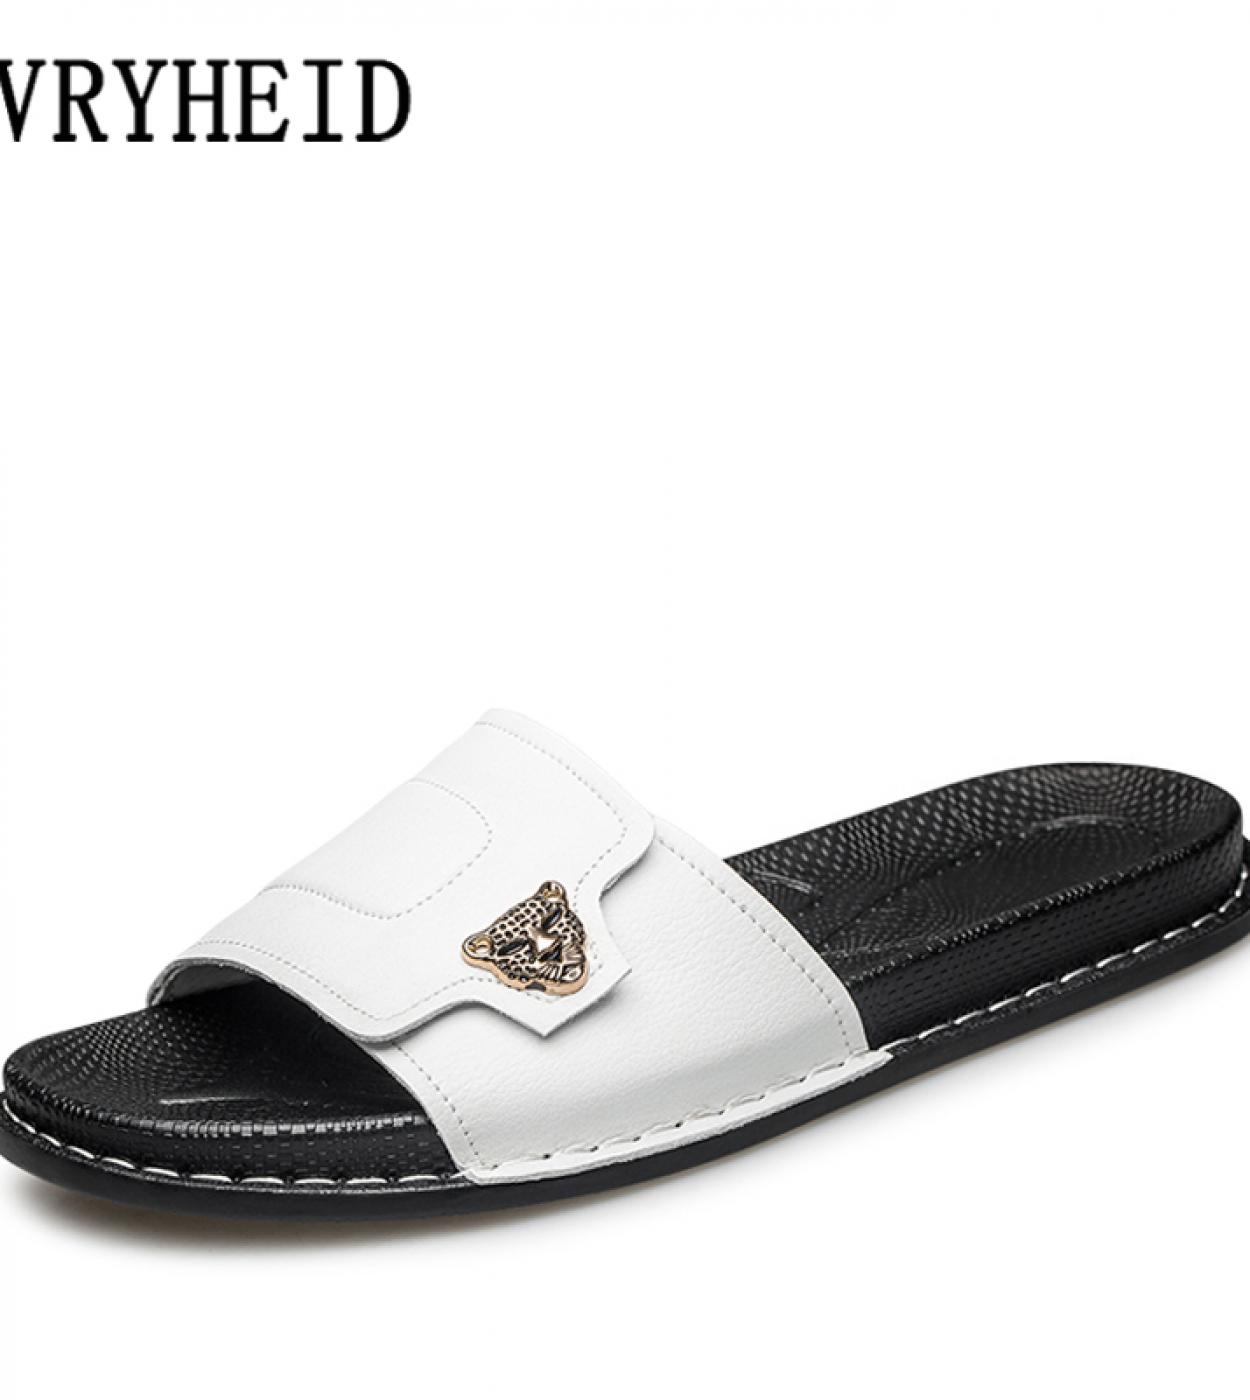 Vryheid High Quality Men Slippers Genuine Leather Summer Soft Footwear Fashion Male Outdoor Flat Men Sandals Casual Beac